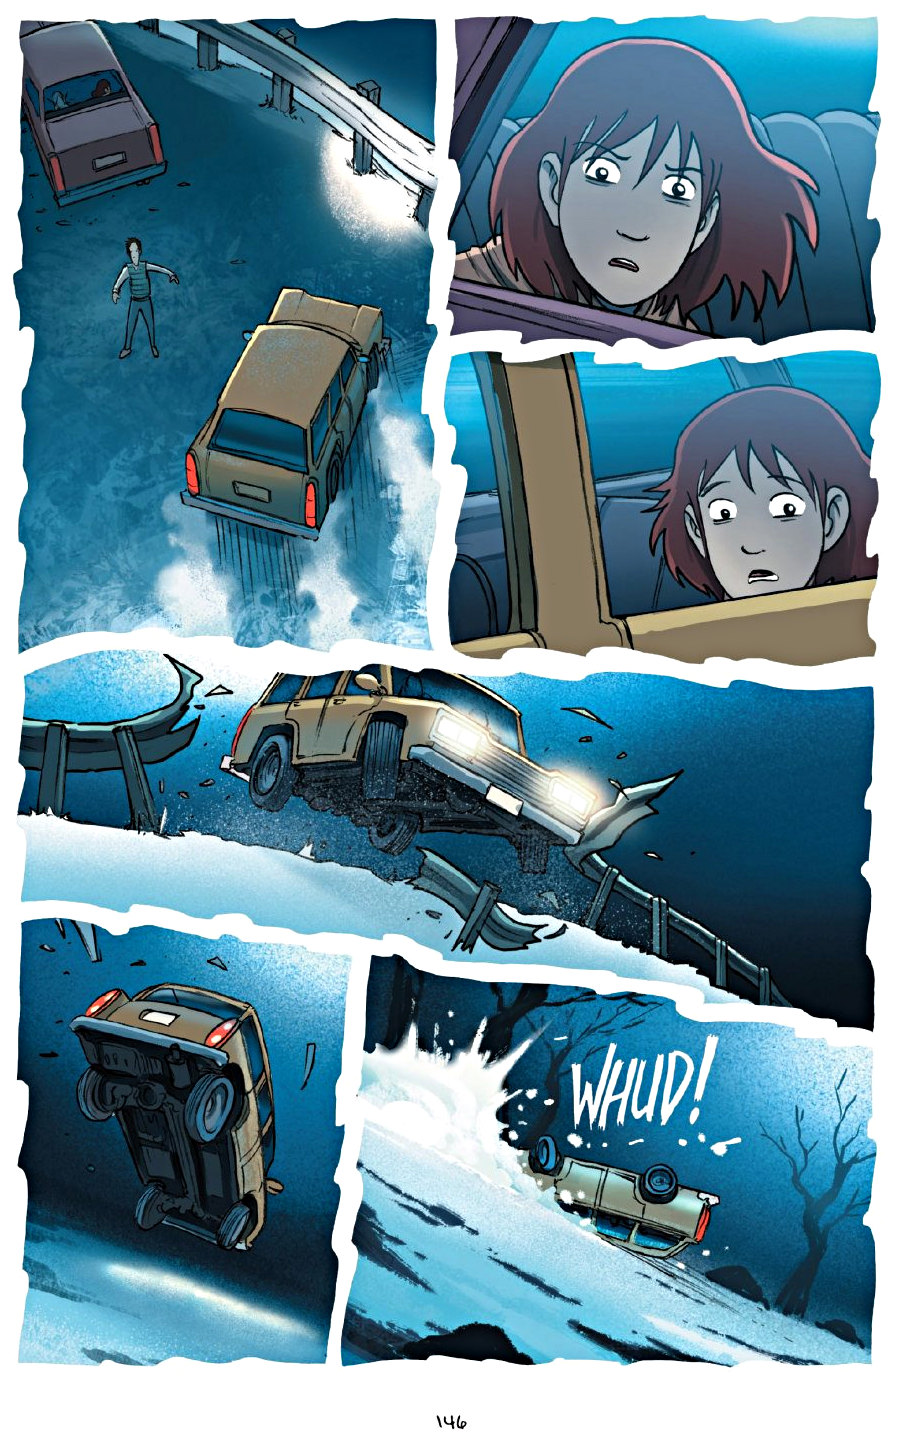 page 146 of amulet 7 firelight graphic novel